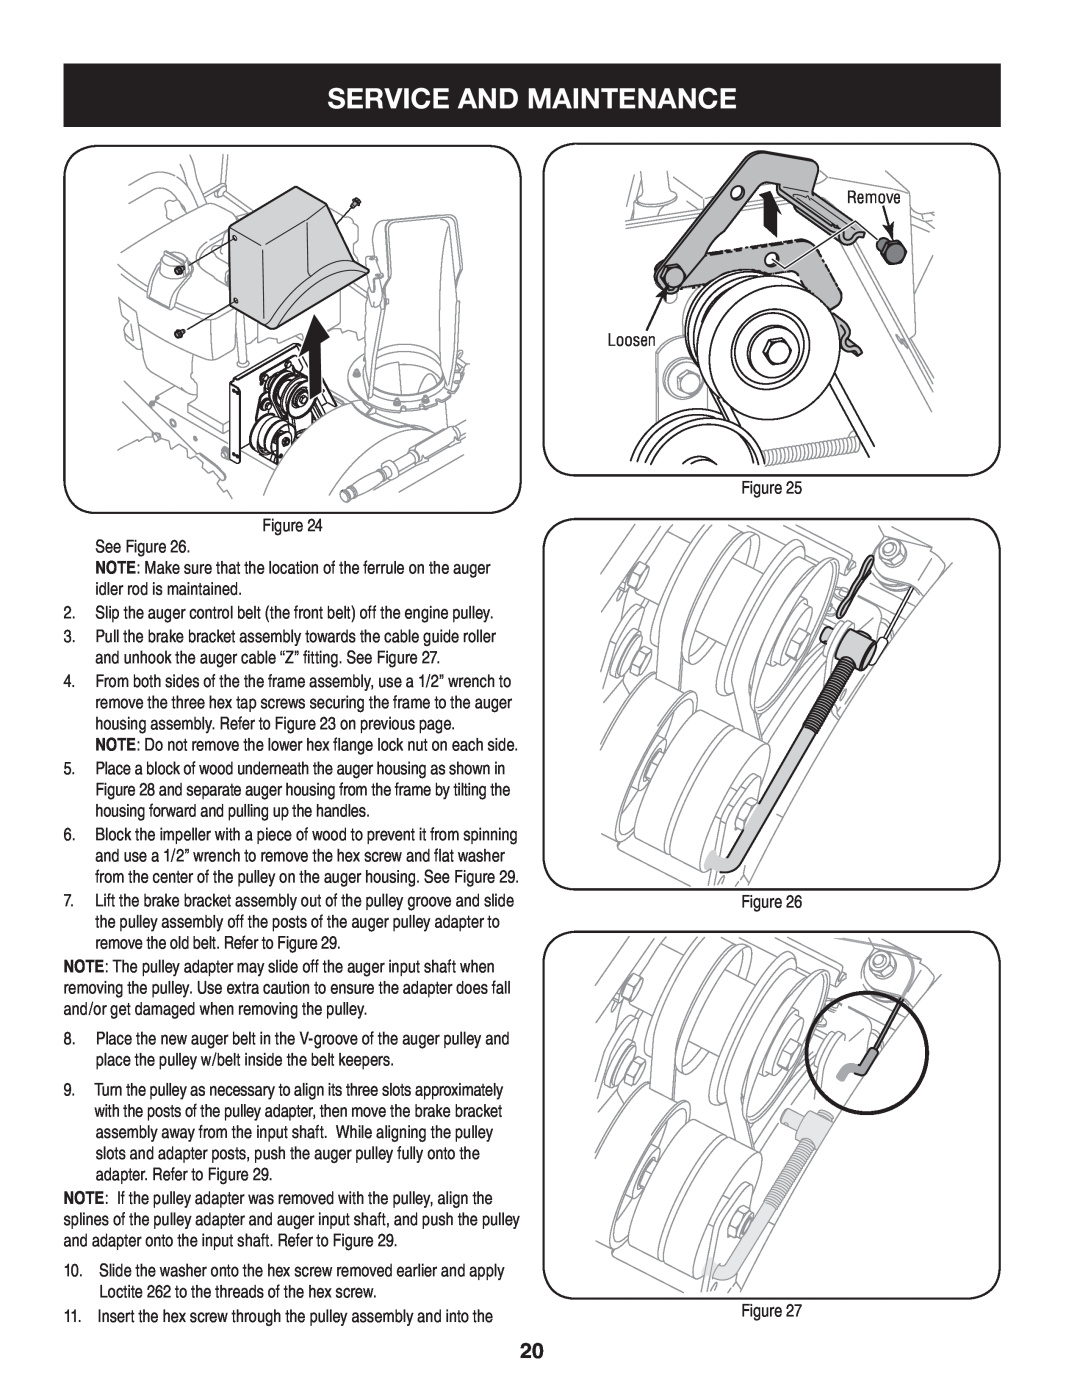 Craftsman 247.88845 Service And Maintenance, See Figure, Slip the auger control belt the front belt off the engine pulley 